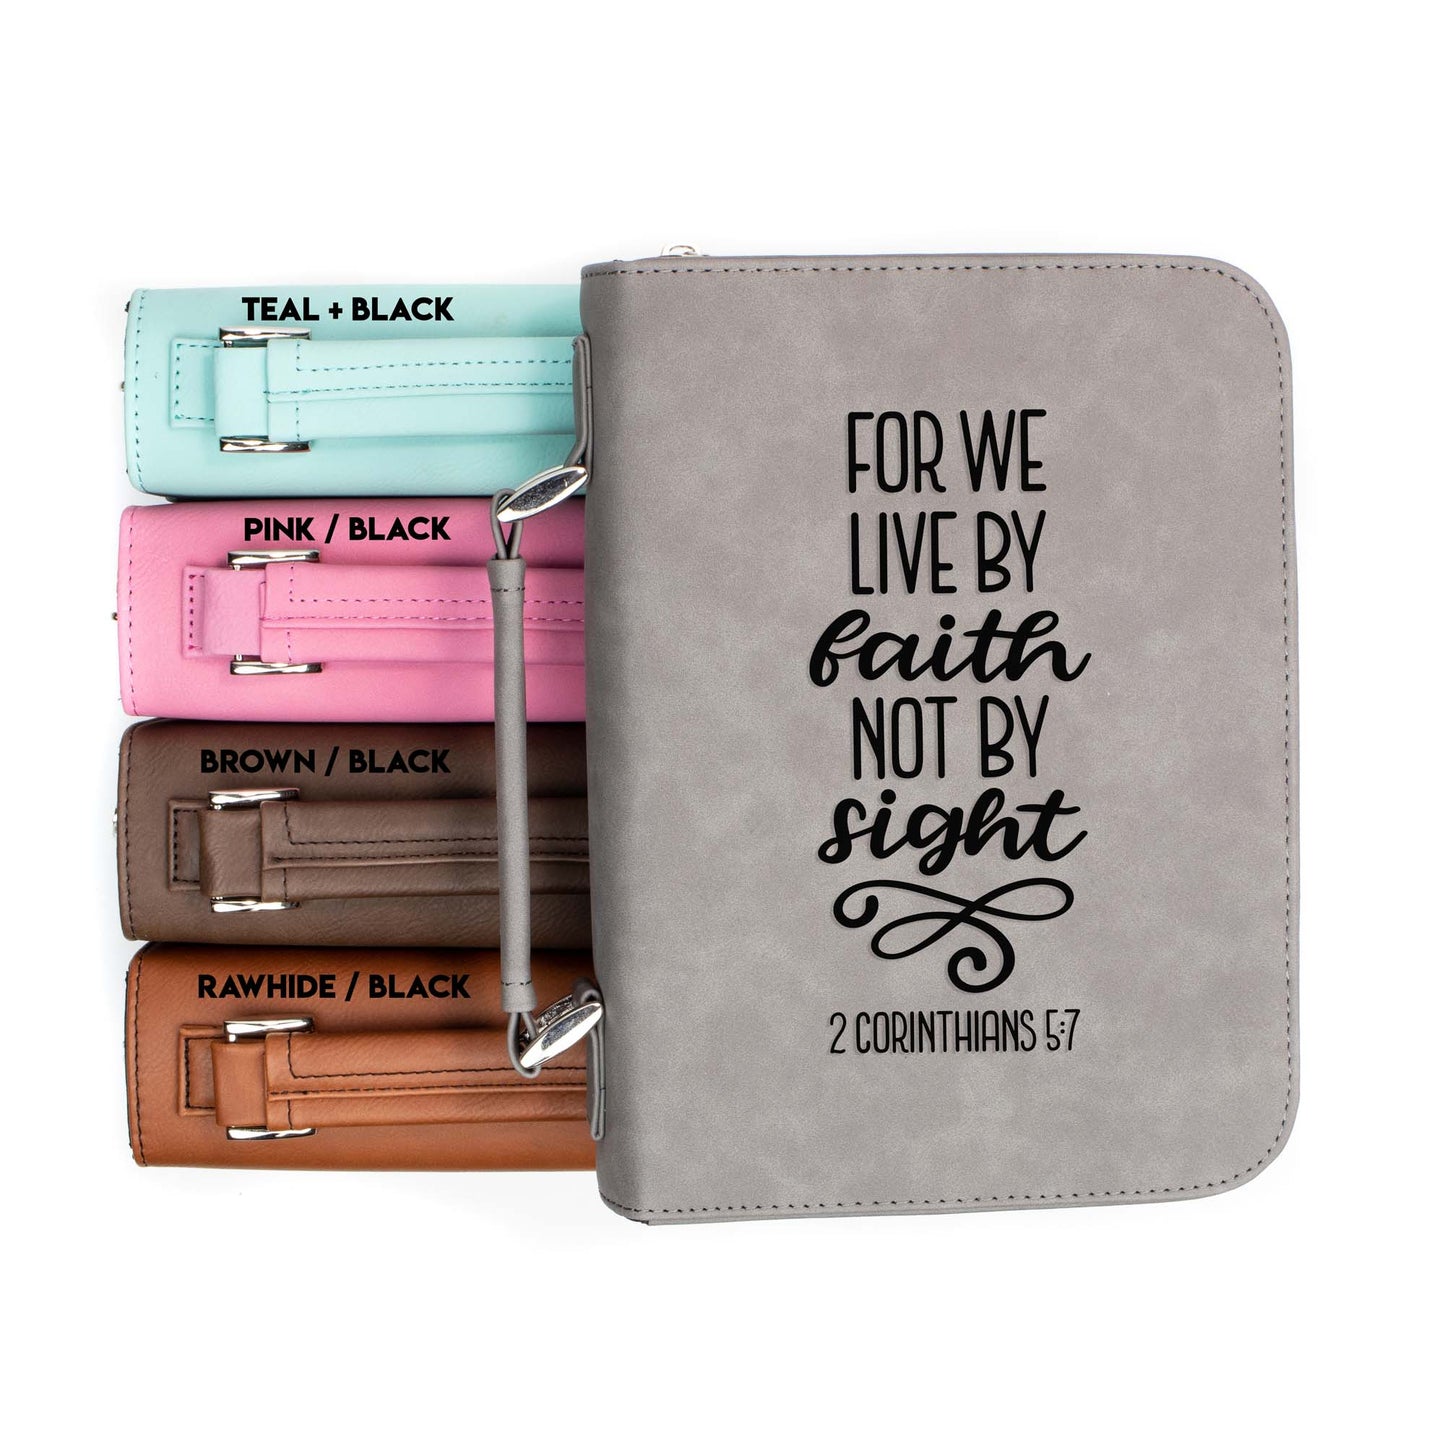 Live by Faith Not Sight 2 Corinthians 5-7 Bible Cover | Faux Leather With Handle + Pockets